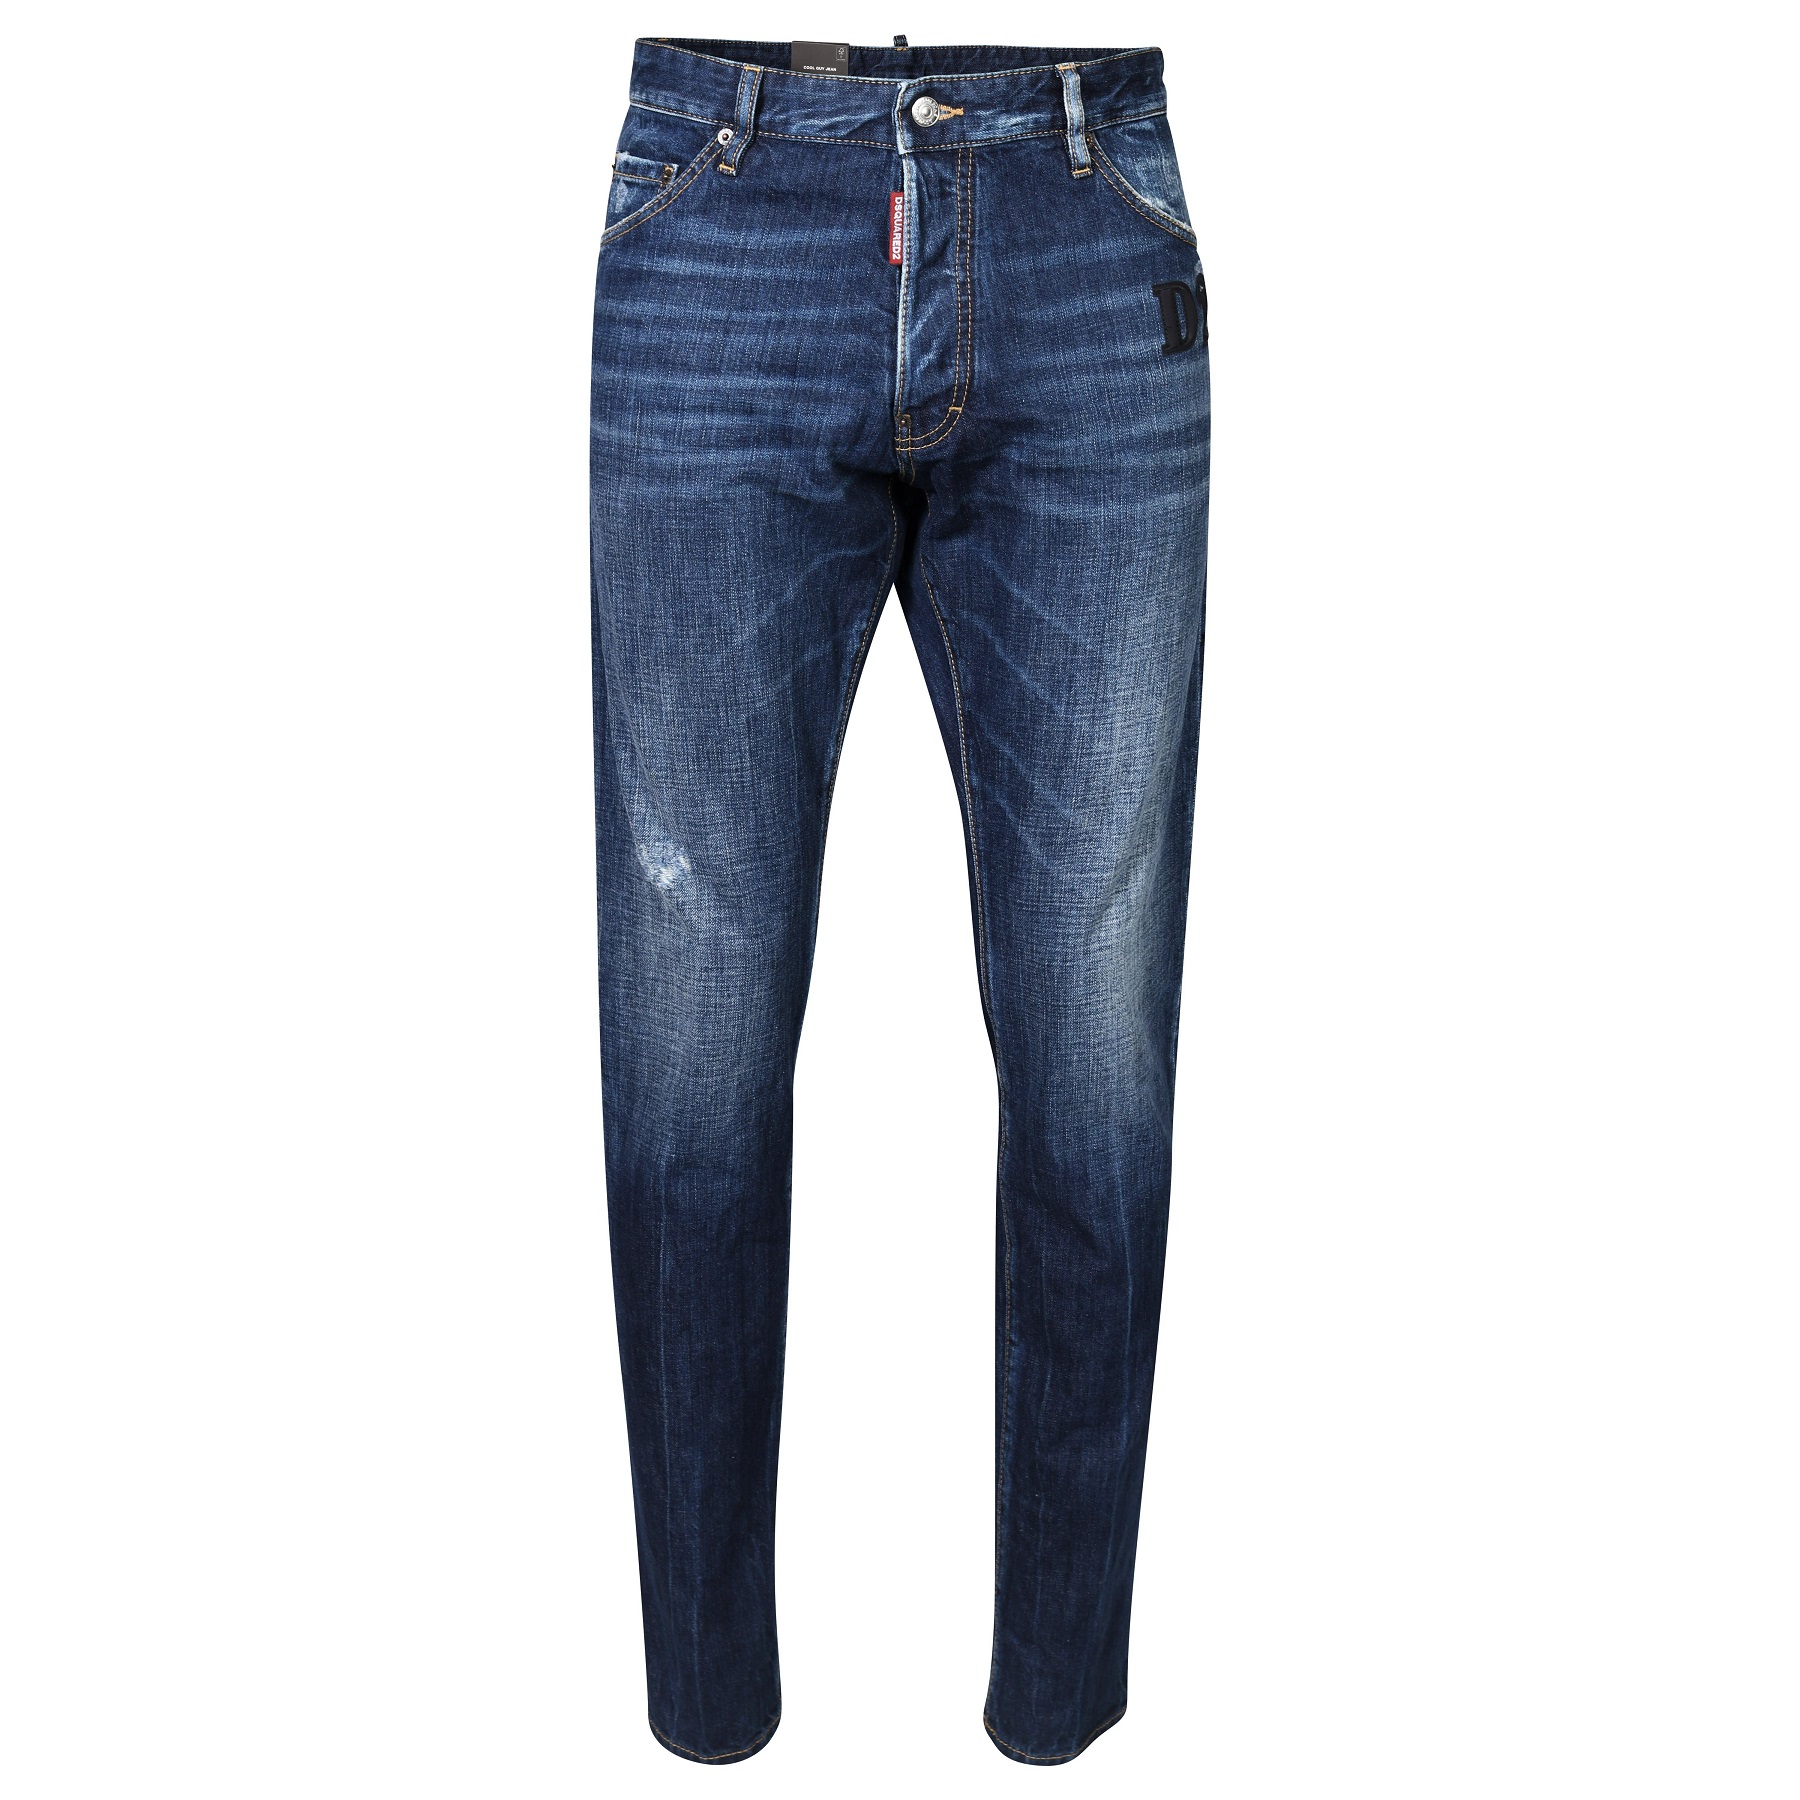 DSQUARED2 Jeans Cool Guy D2 in Washed Dark Blue 56